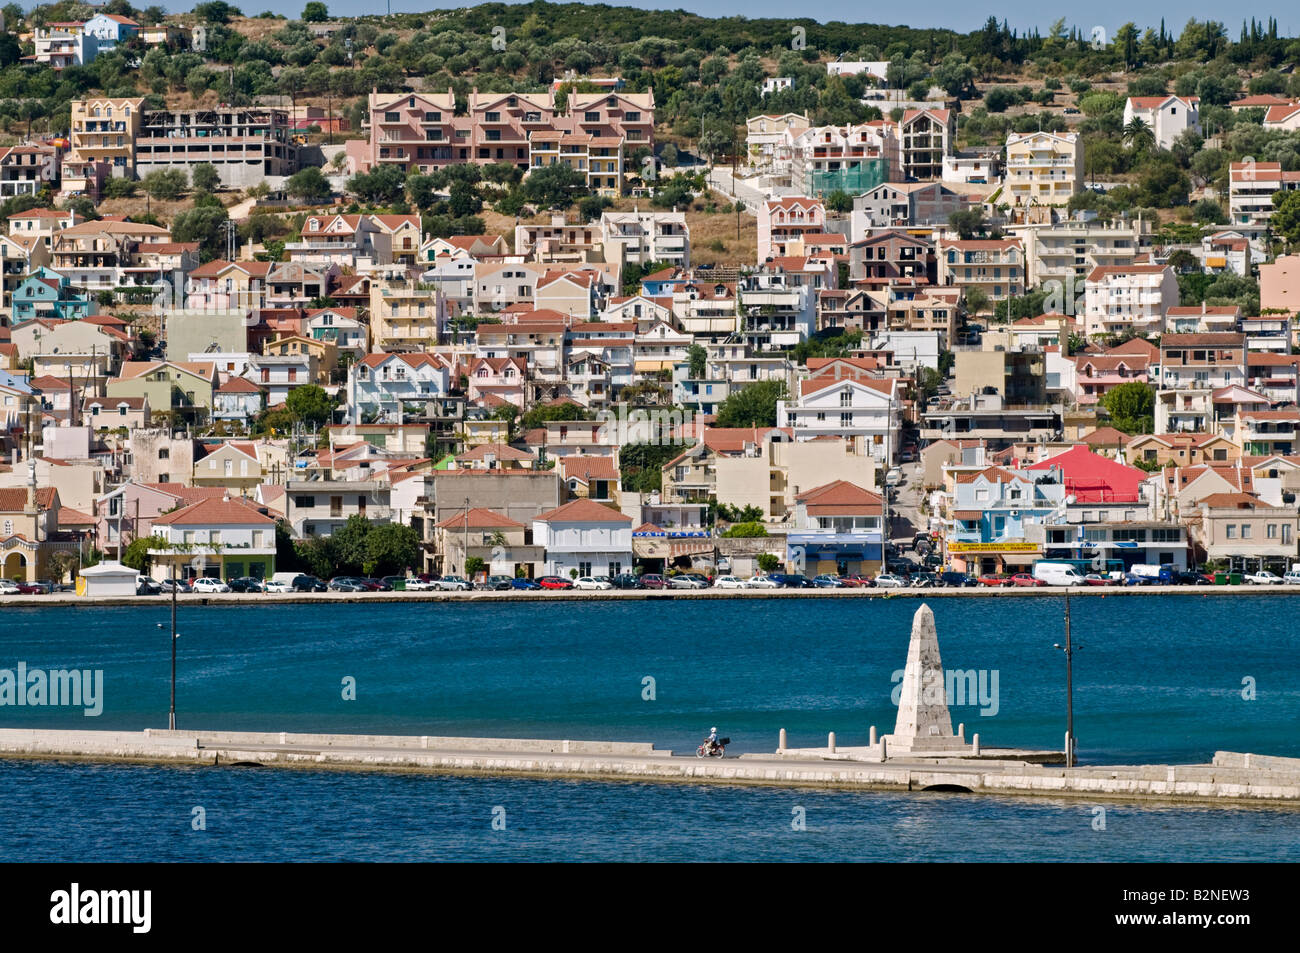 Looking across to Argostoli from across the bay with the Dhrapano bridge and memorial obelisk in the foreground Stock Photo